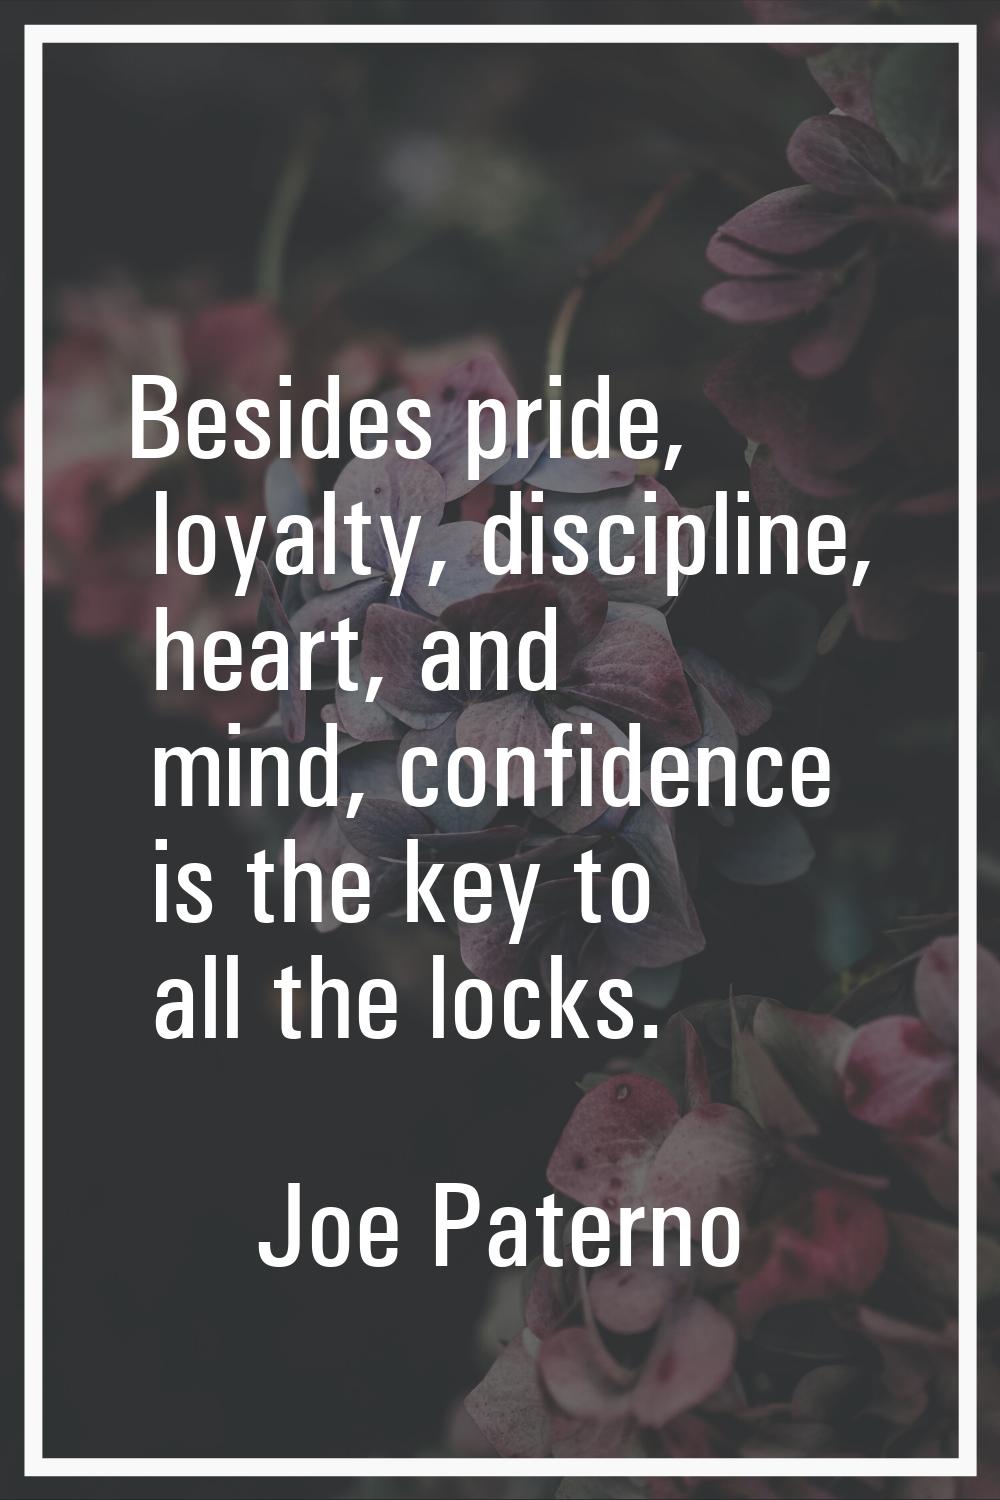 Besides pride, loyalty, discipline, heart, and mind, confidence is the key to all the locks.